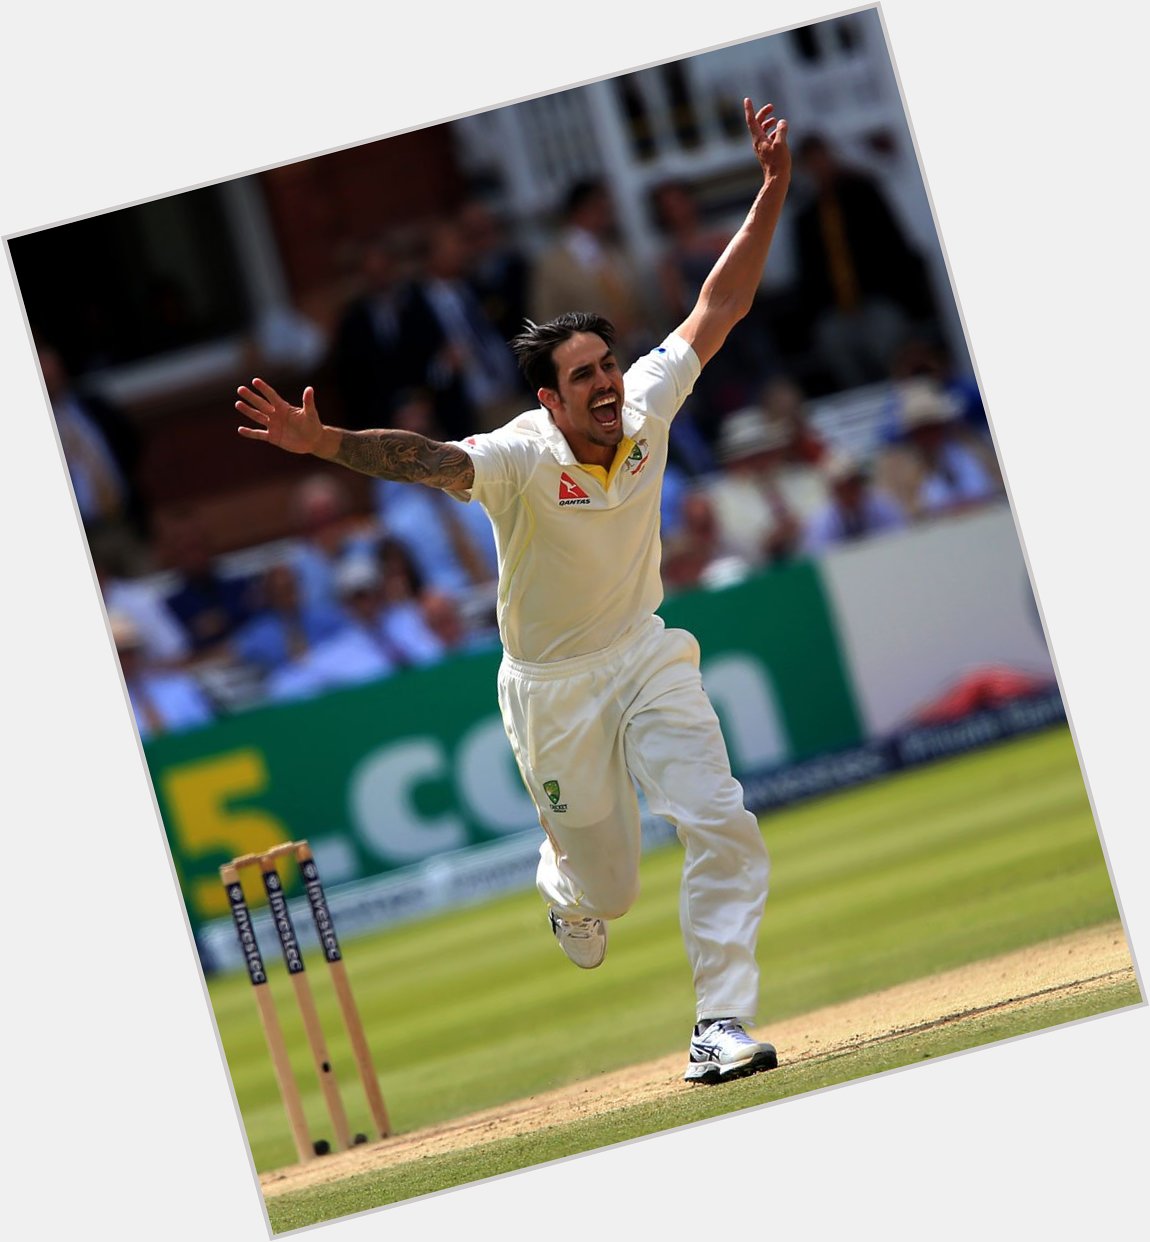 A very Happy Birthday to a fearsome fast bowler, Mitchell Johnson! Wish you all the best for the upcoming summer. 